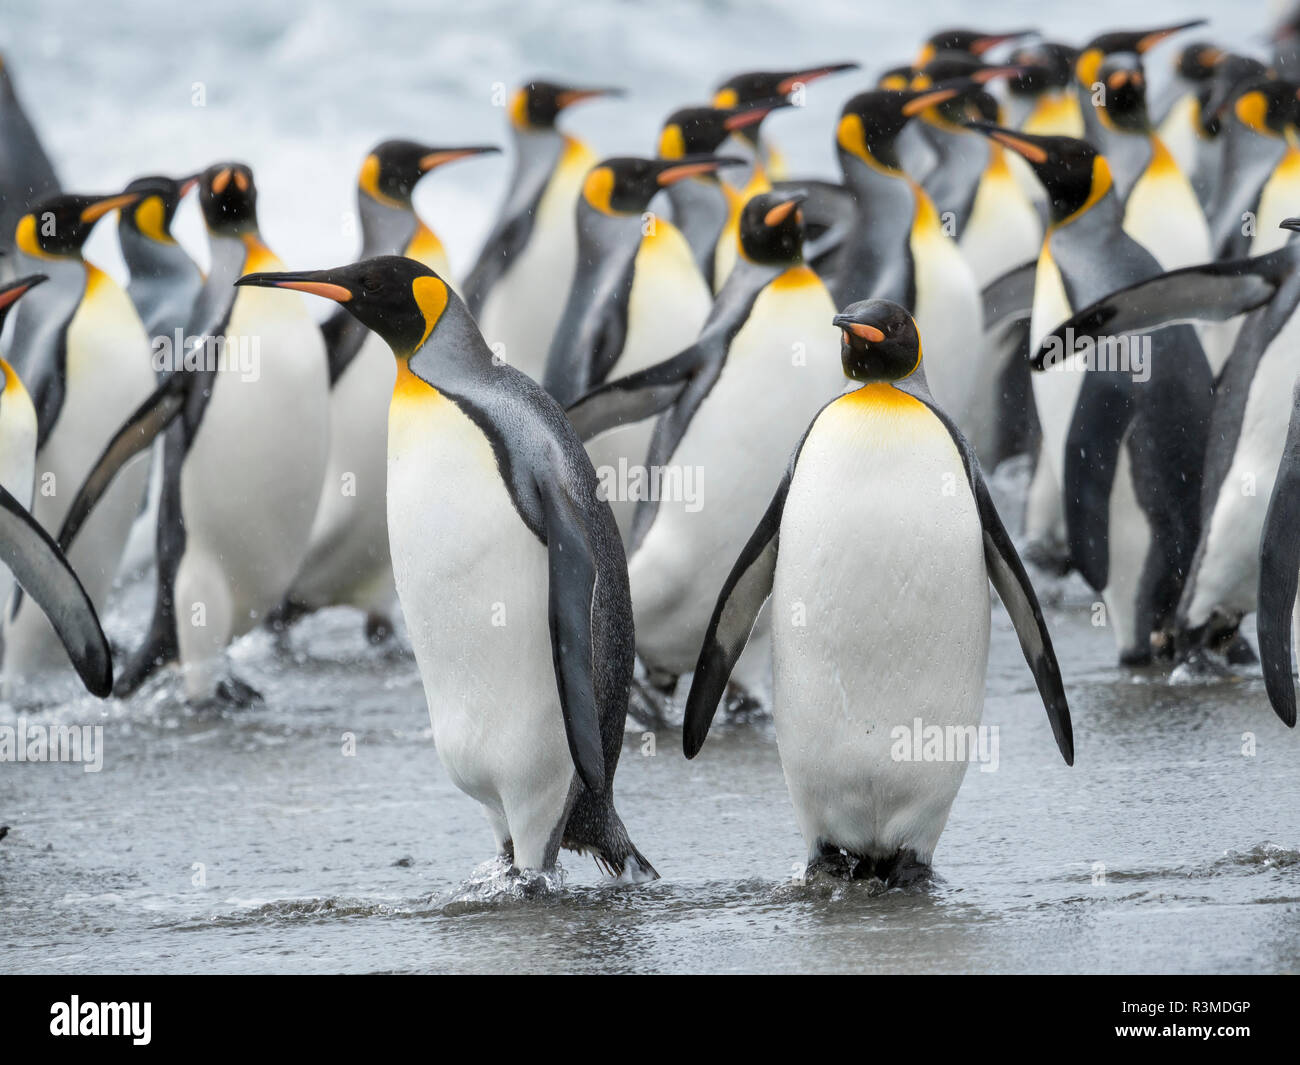 King Penguin (Aptenodytes patagonicus) rookery on Salisbury Plain in the Bay of Isles. Adults coming ashore. South Georgia Island Stock Photo